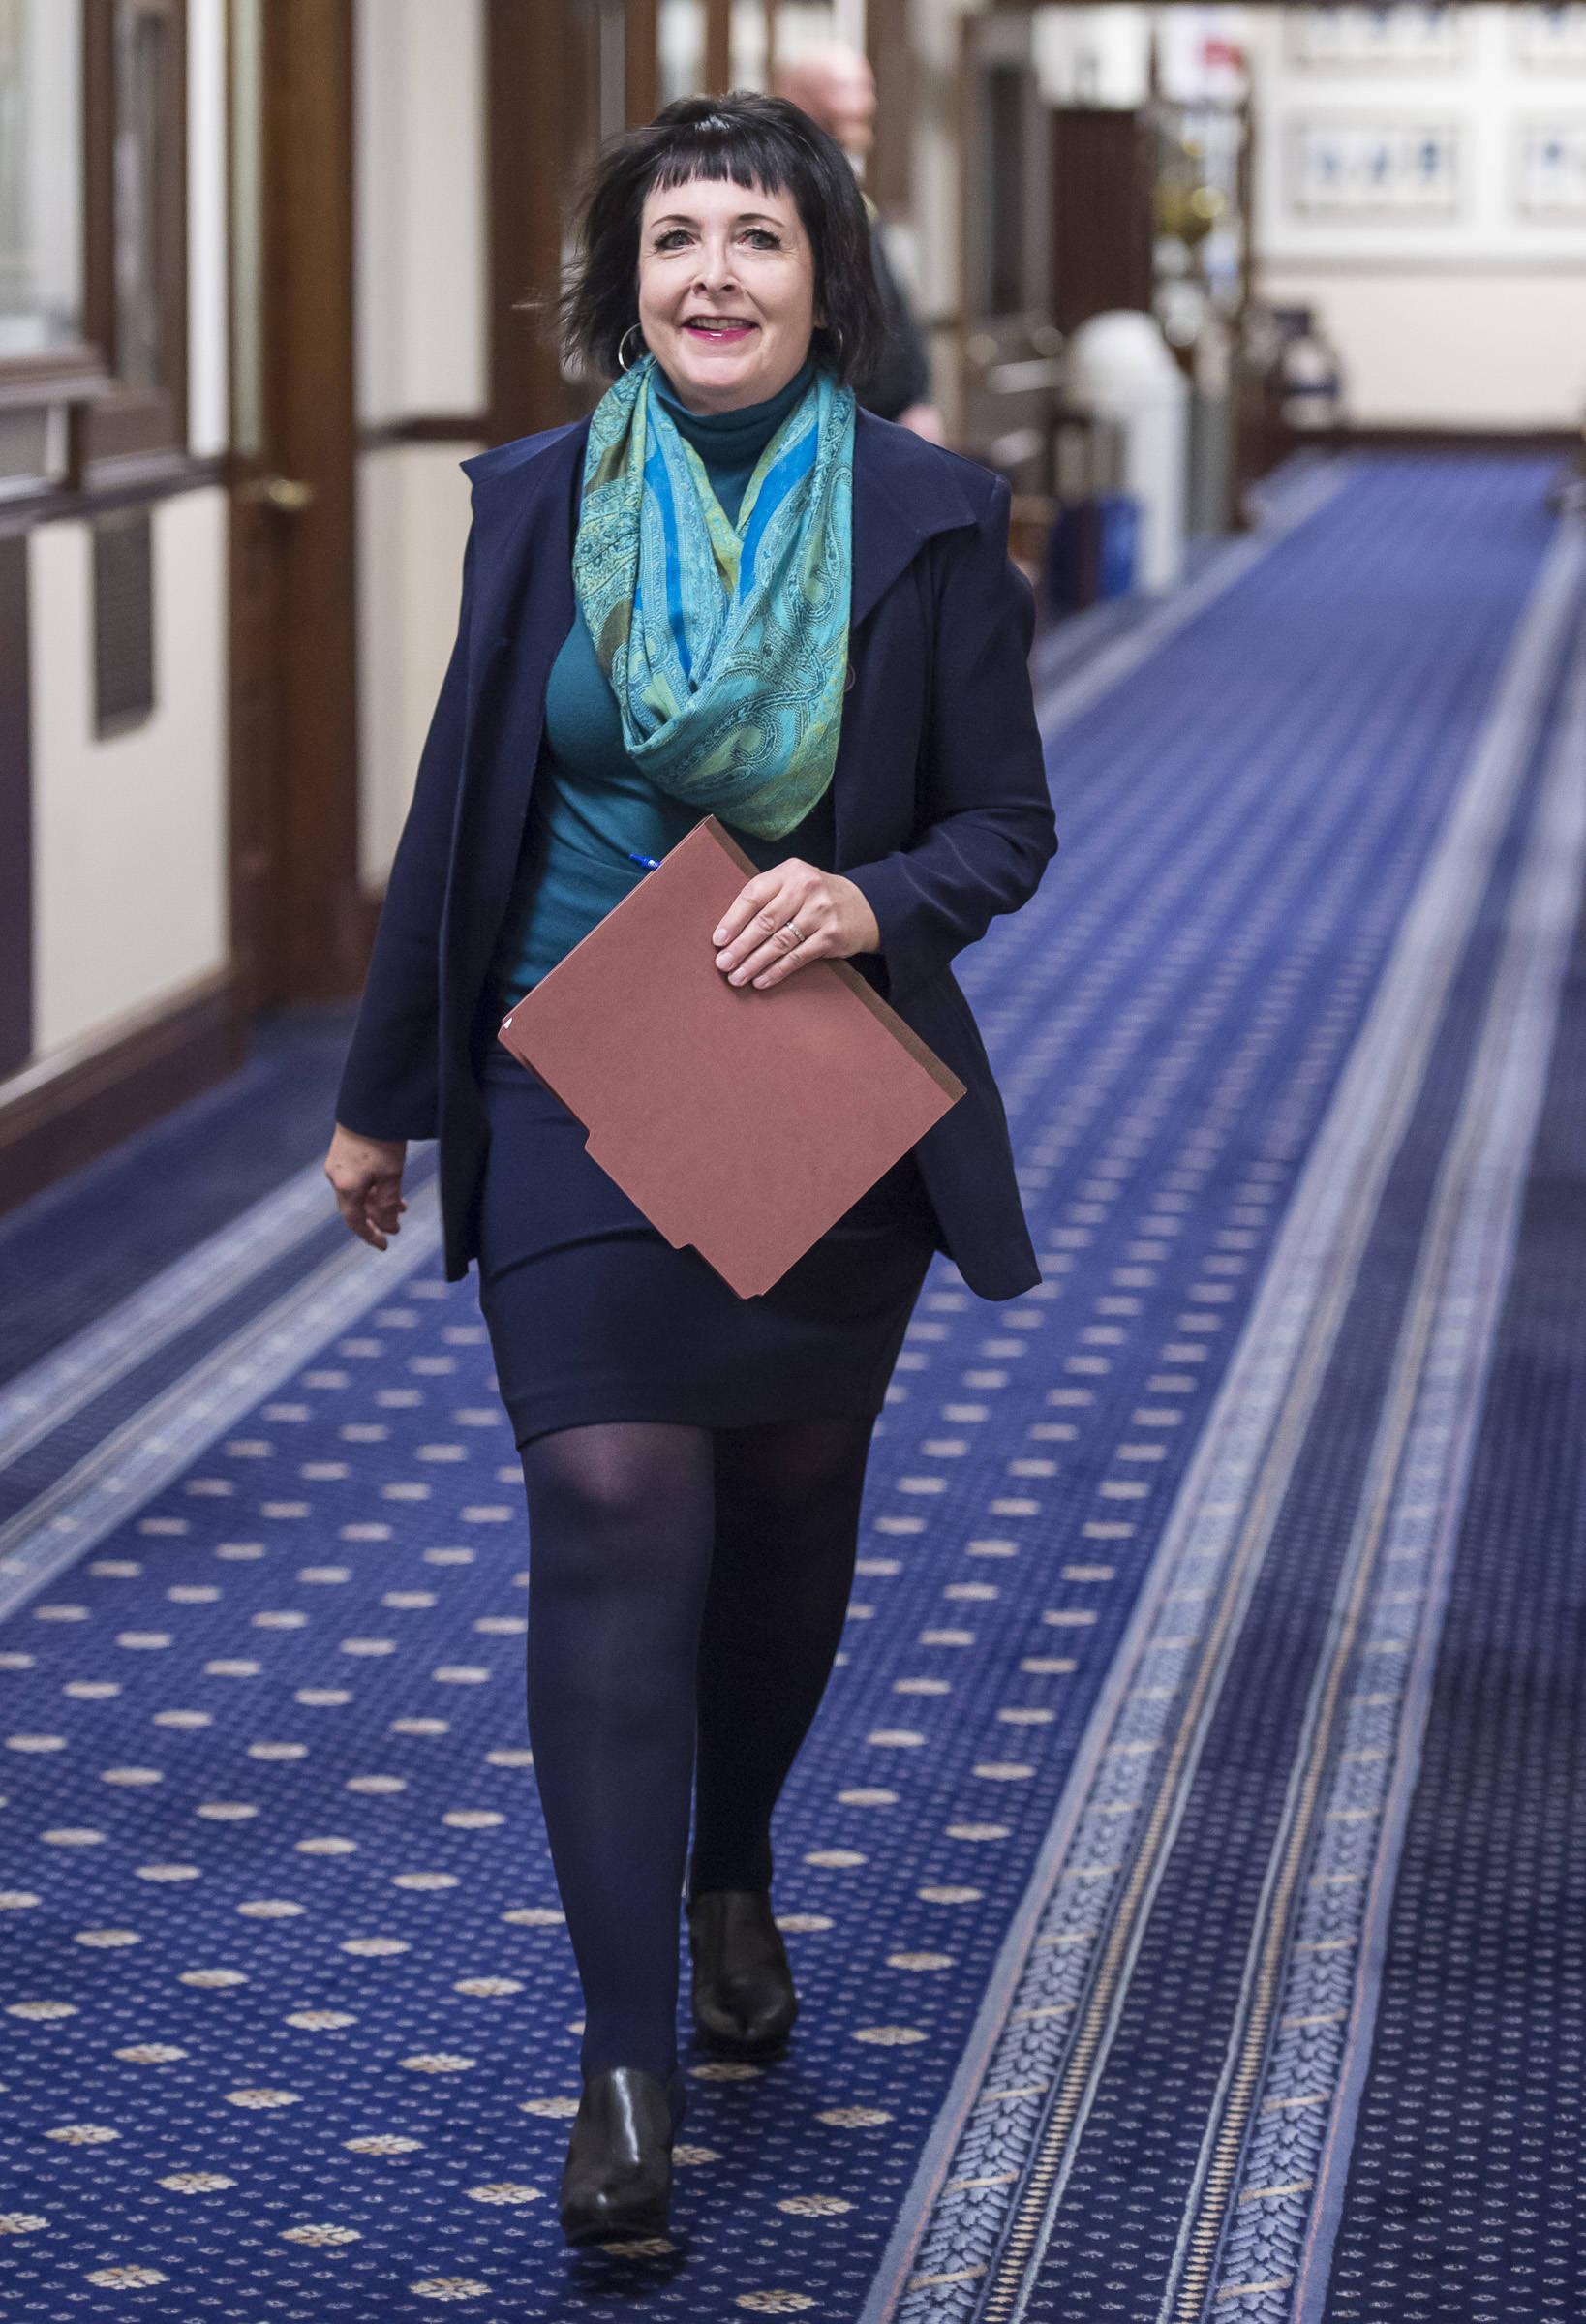 Sen. Shelley Hughes, R-Palmer, walks to attend Gov. Mike Dunleavy’s State of the State speech to a Joint Session of the Alaska Legislature on Tuesday, Jan. 22, 2019. (Michael Penn | Juneau Empire)